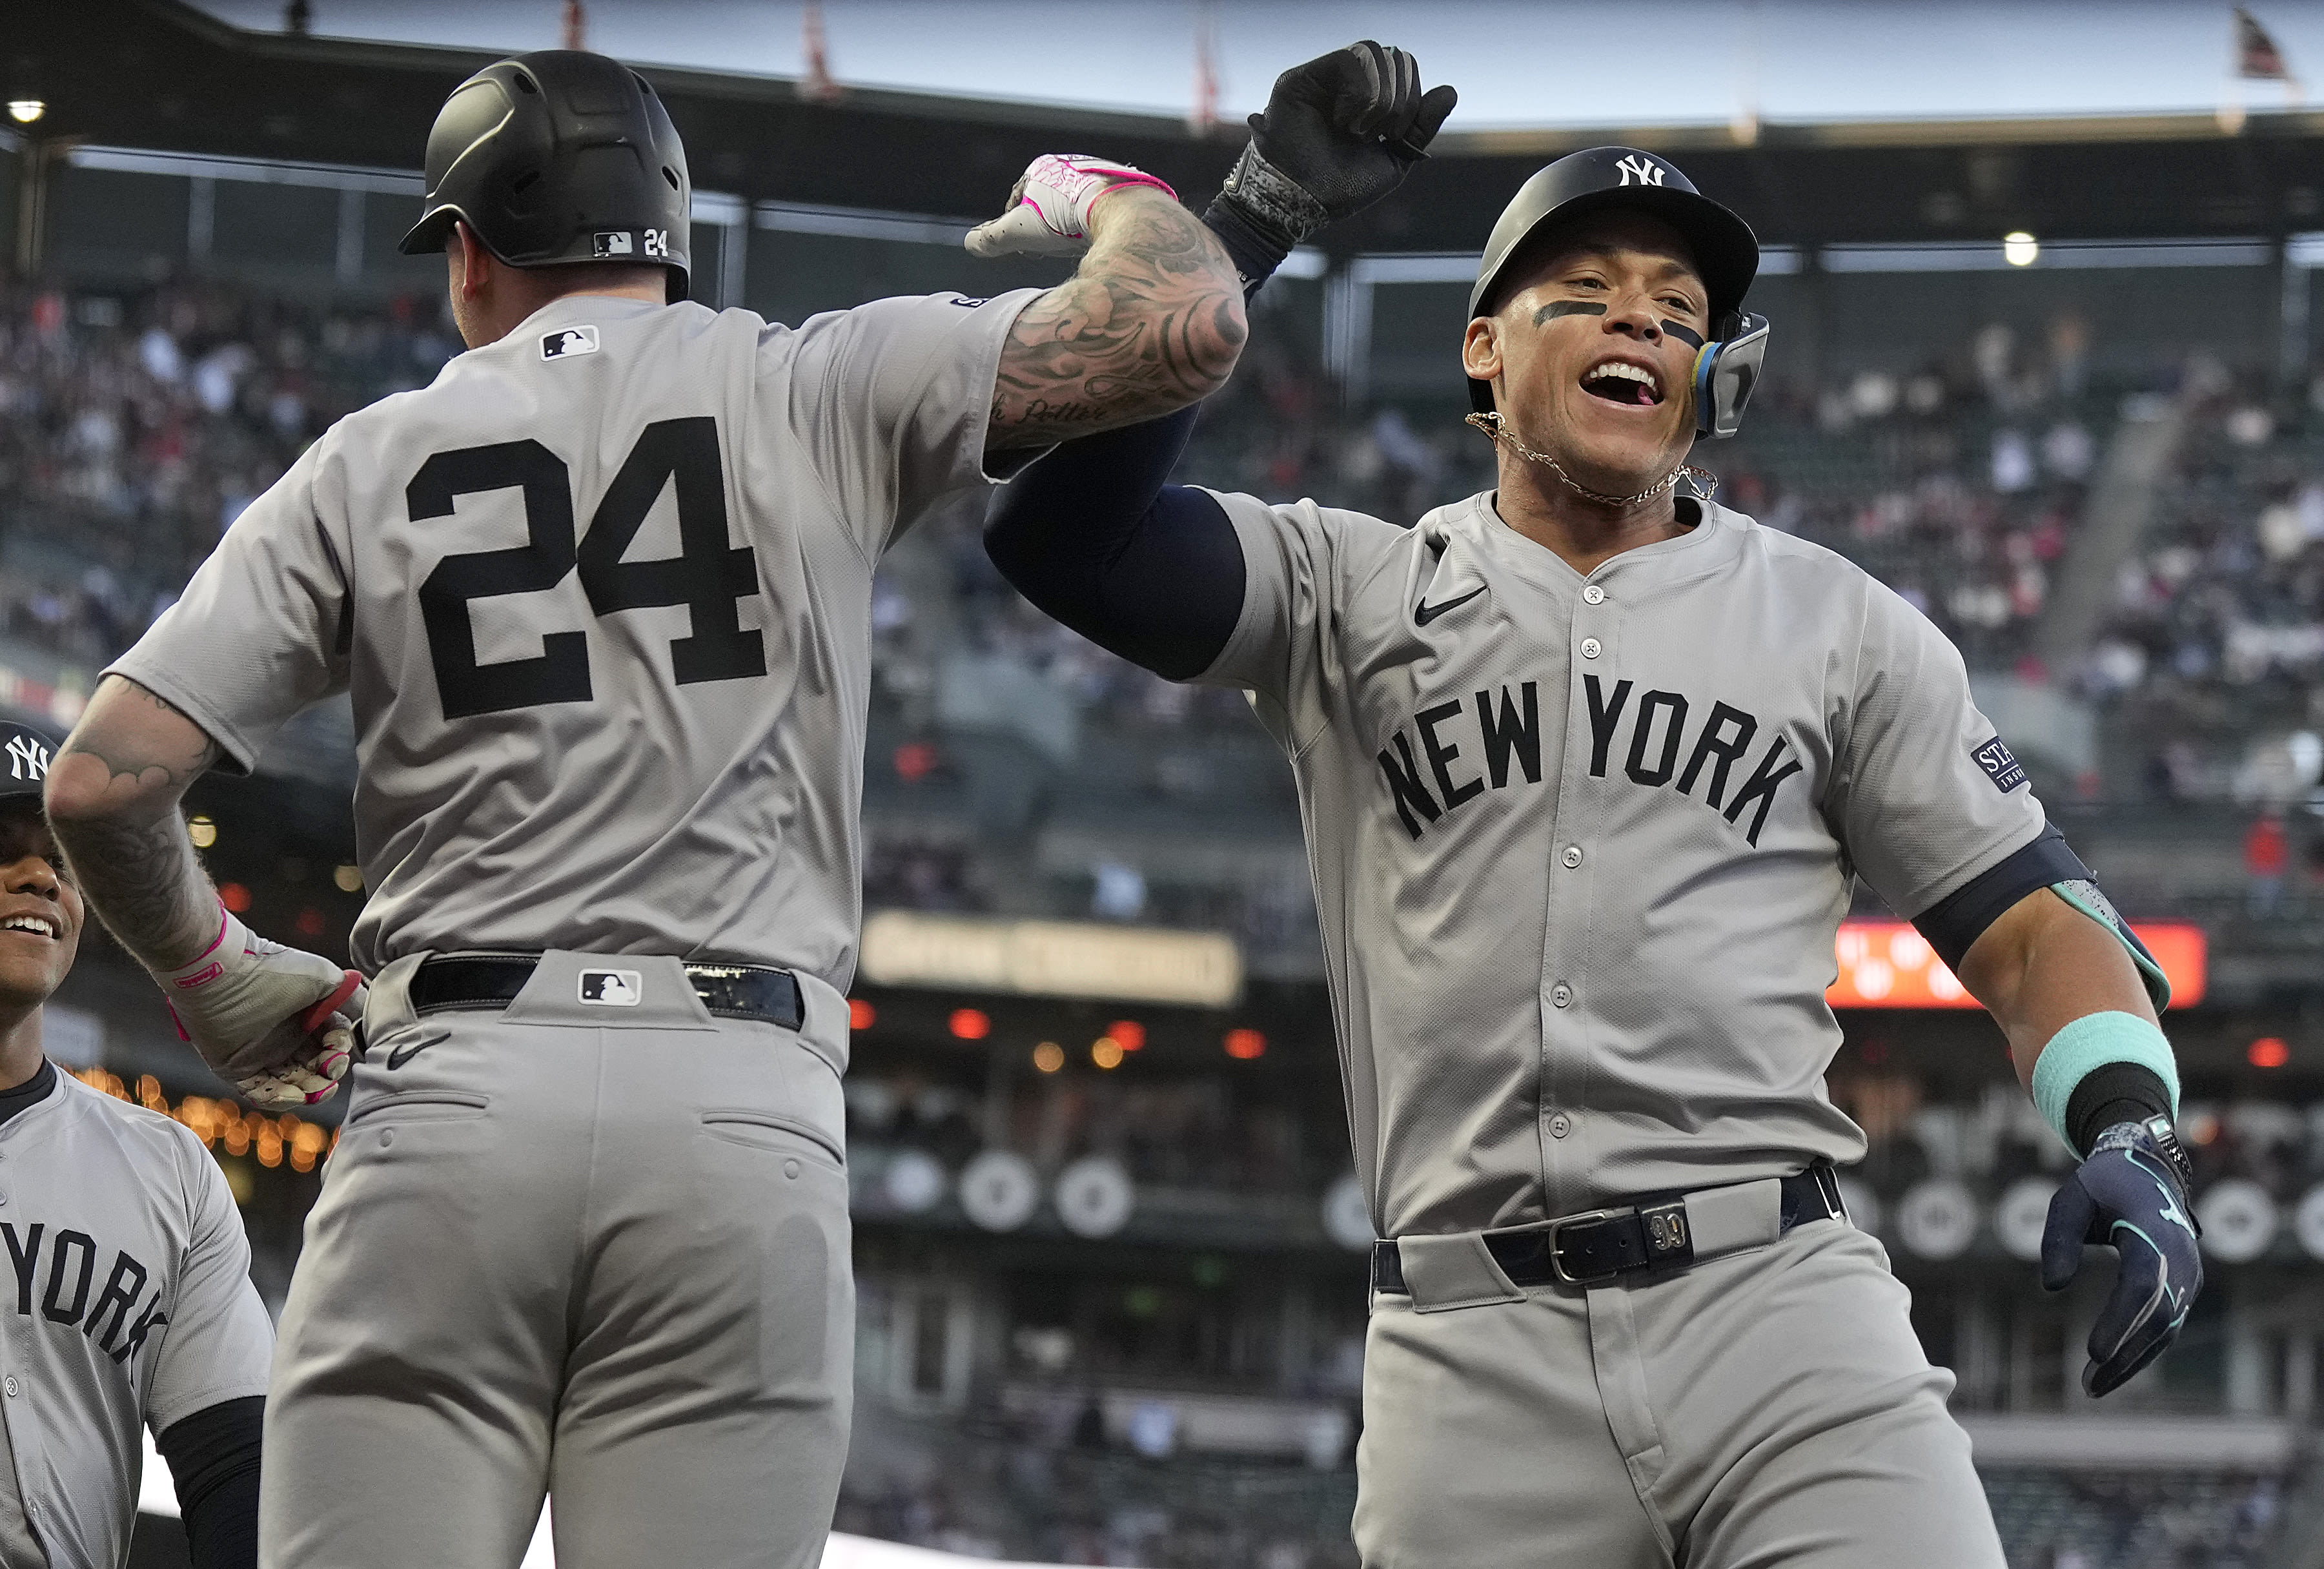 Aaron Judge finishes off torrid May by breaking a Babe Ruth and Lou Gehrig Yankees record